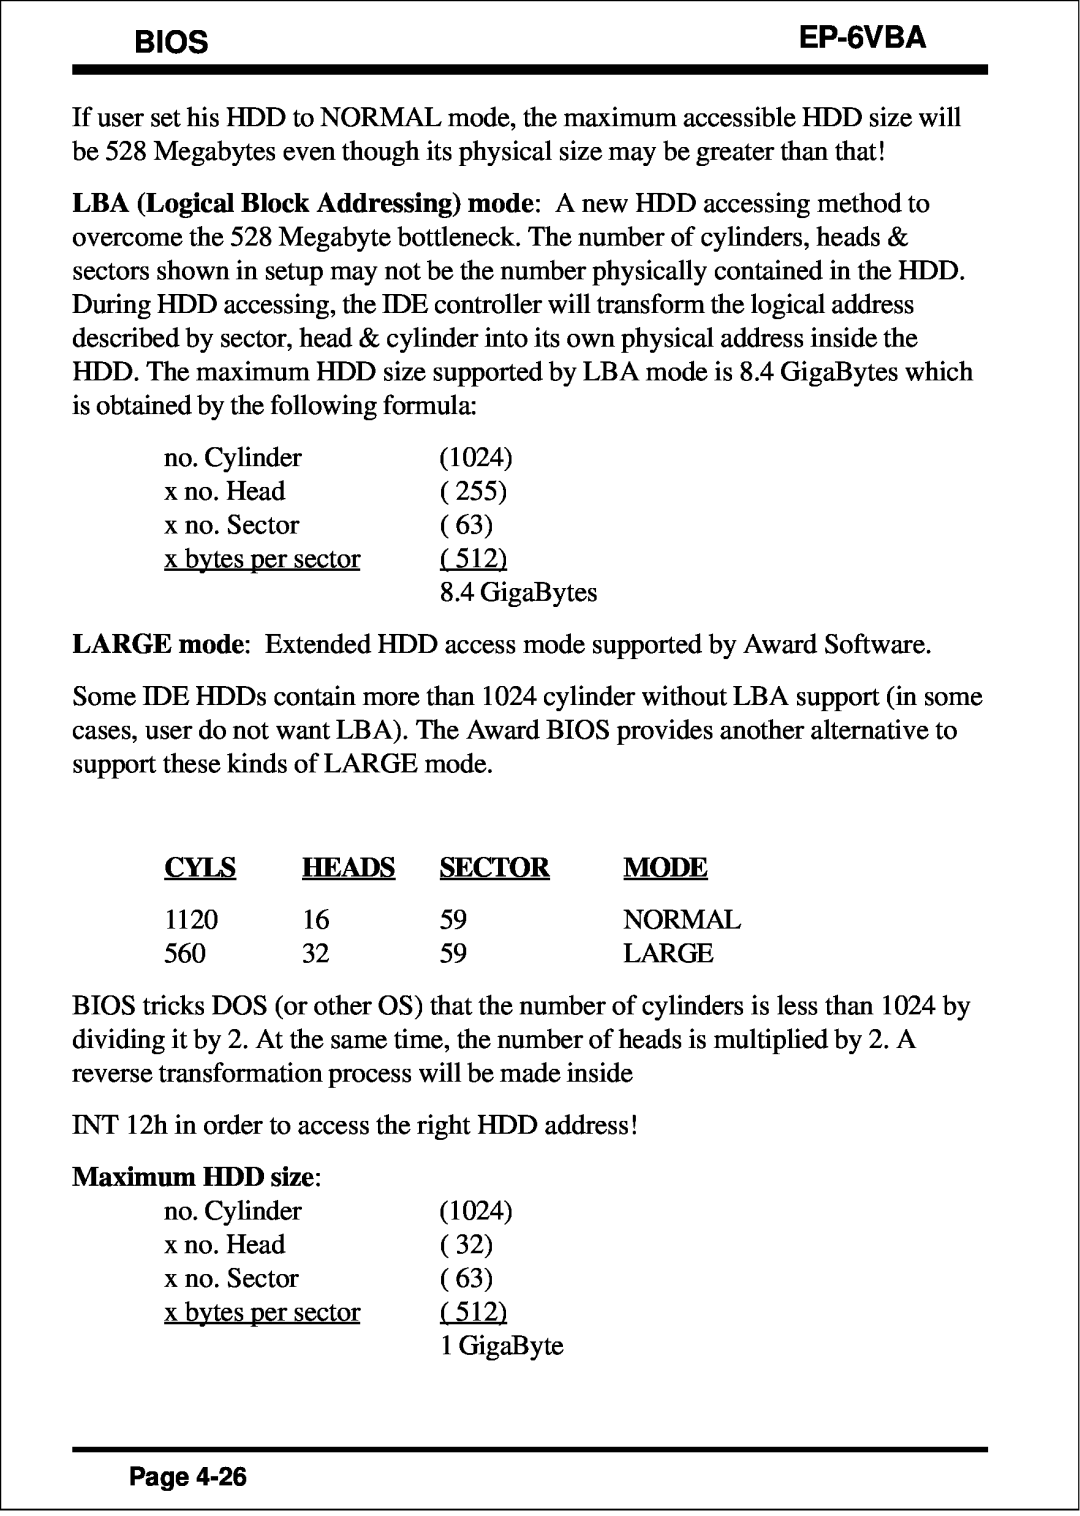 EPoX Computer EP-6VBA specifications Bios, Cyls, Heads, Sector, Mode, Maximum HDD size 